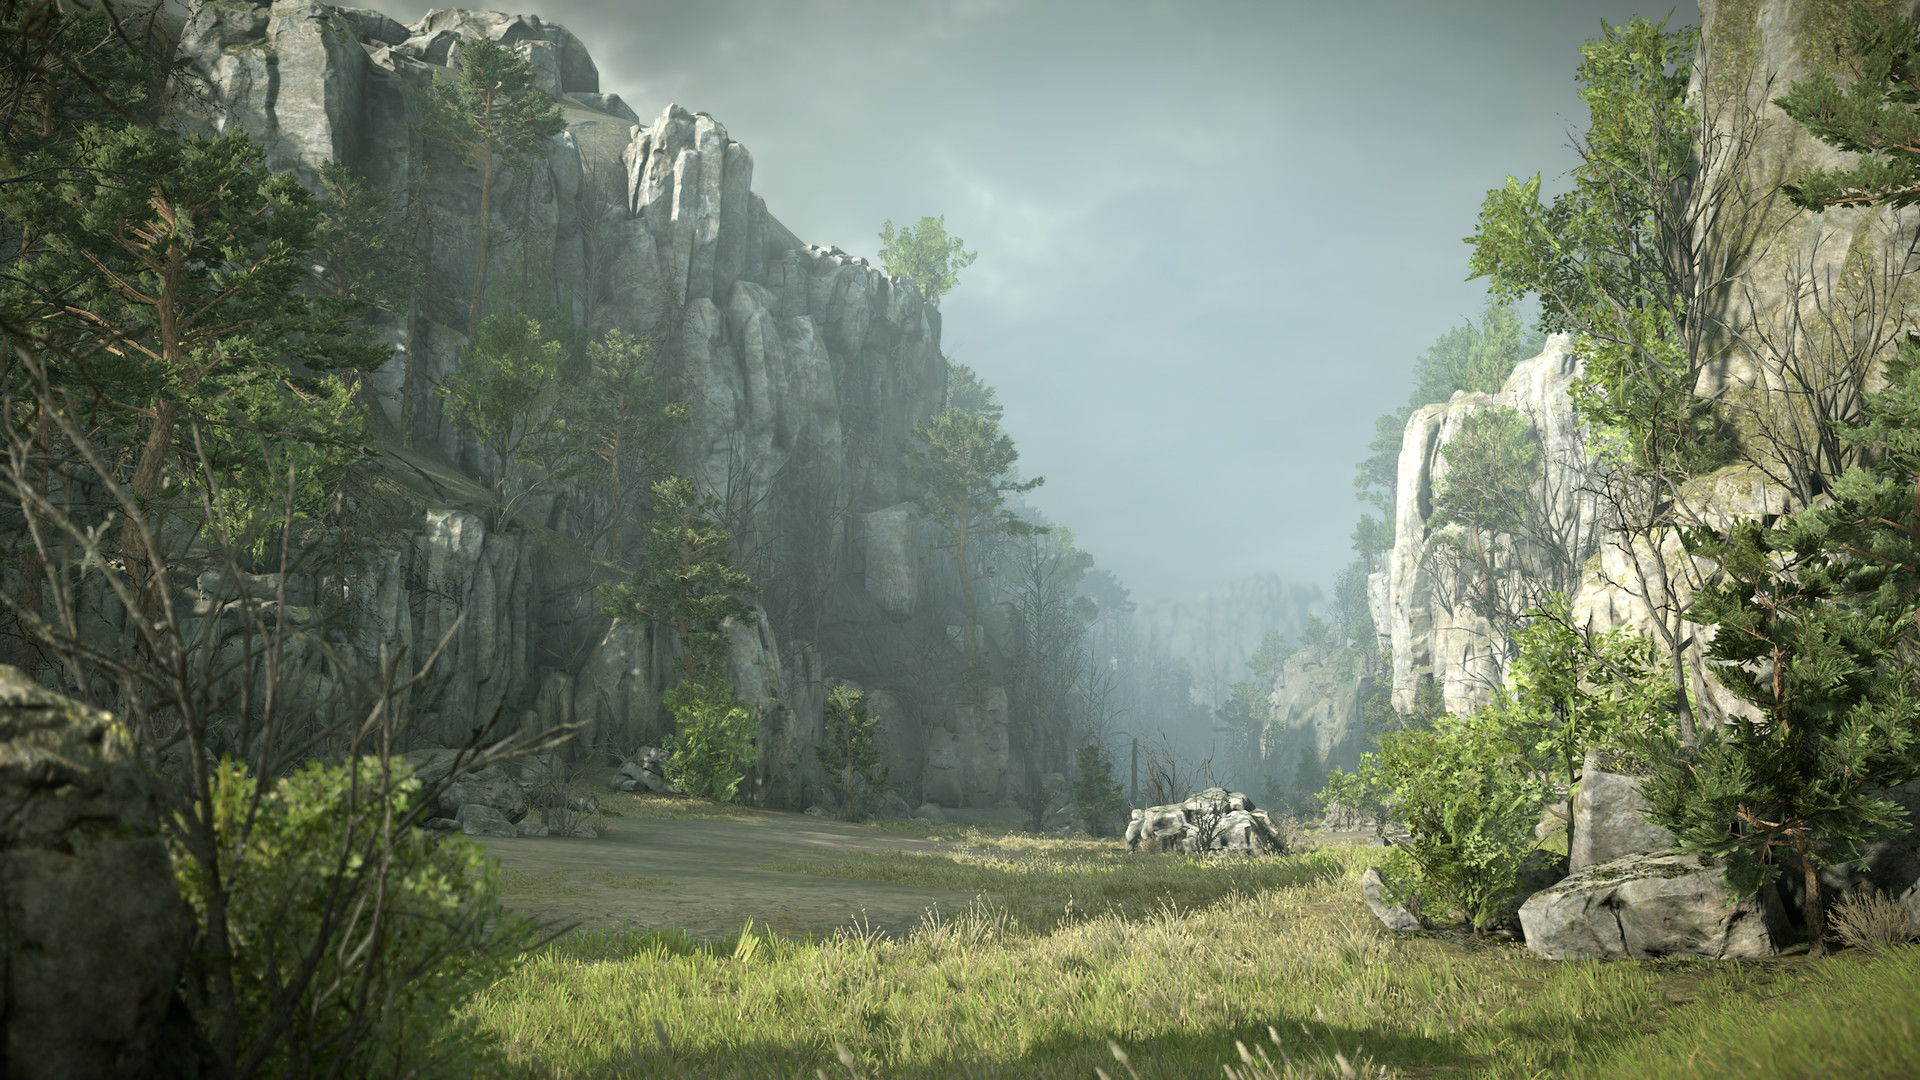 ArtStation - Shadow of the Colossus - PS4 Remake - Environment Artist